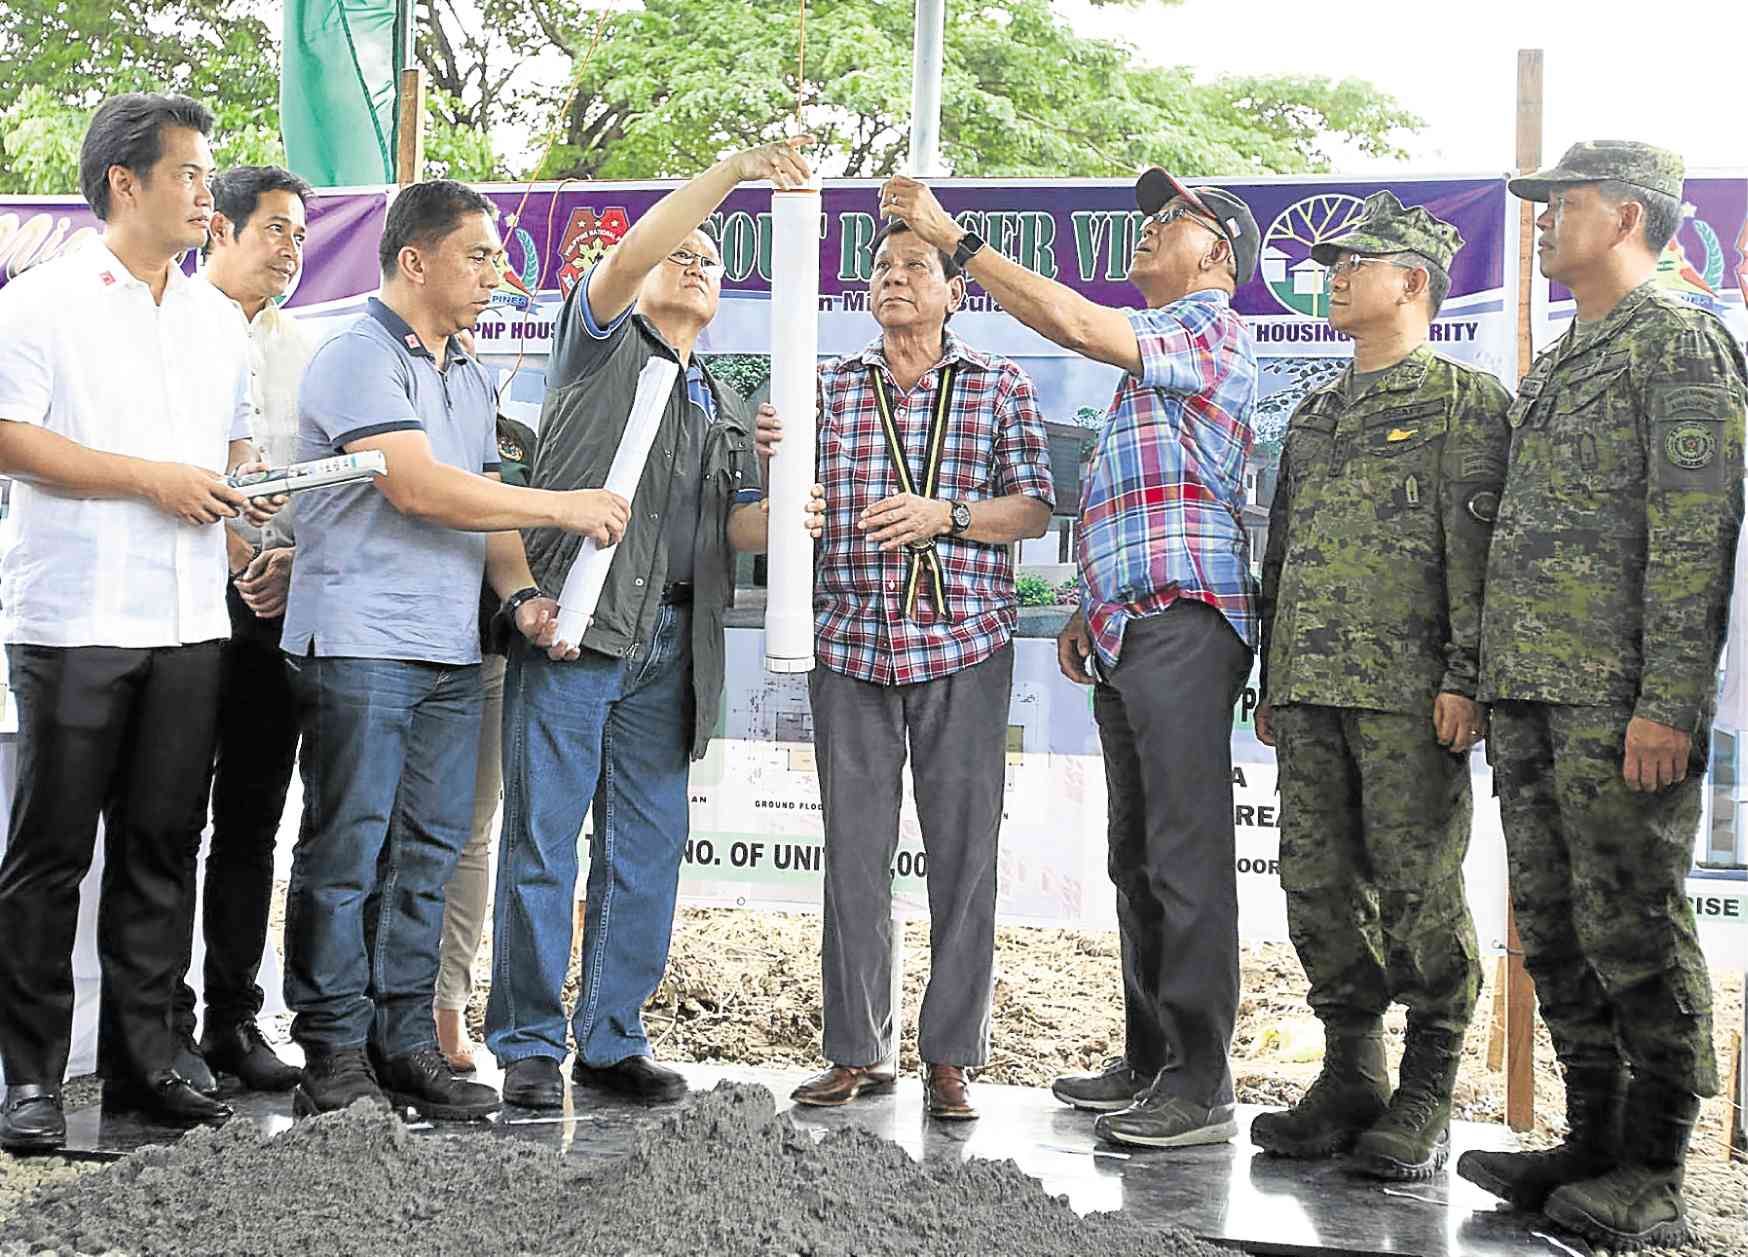 President Duterte, accompanied by defense and housing officials, leads the groundbreaking ceremony for a housing project for soldiers in San Miguel town, Bulacan province.  —JOAN BONDOC